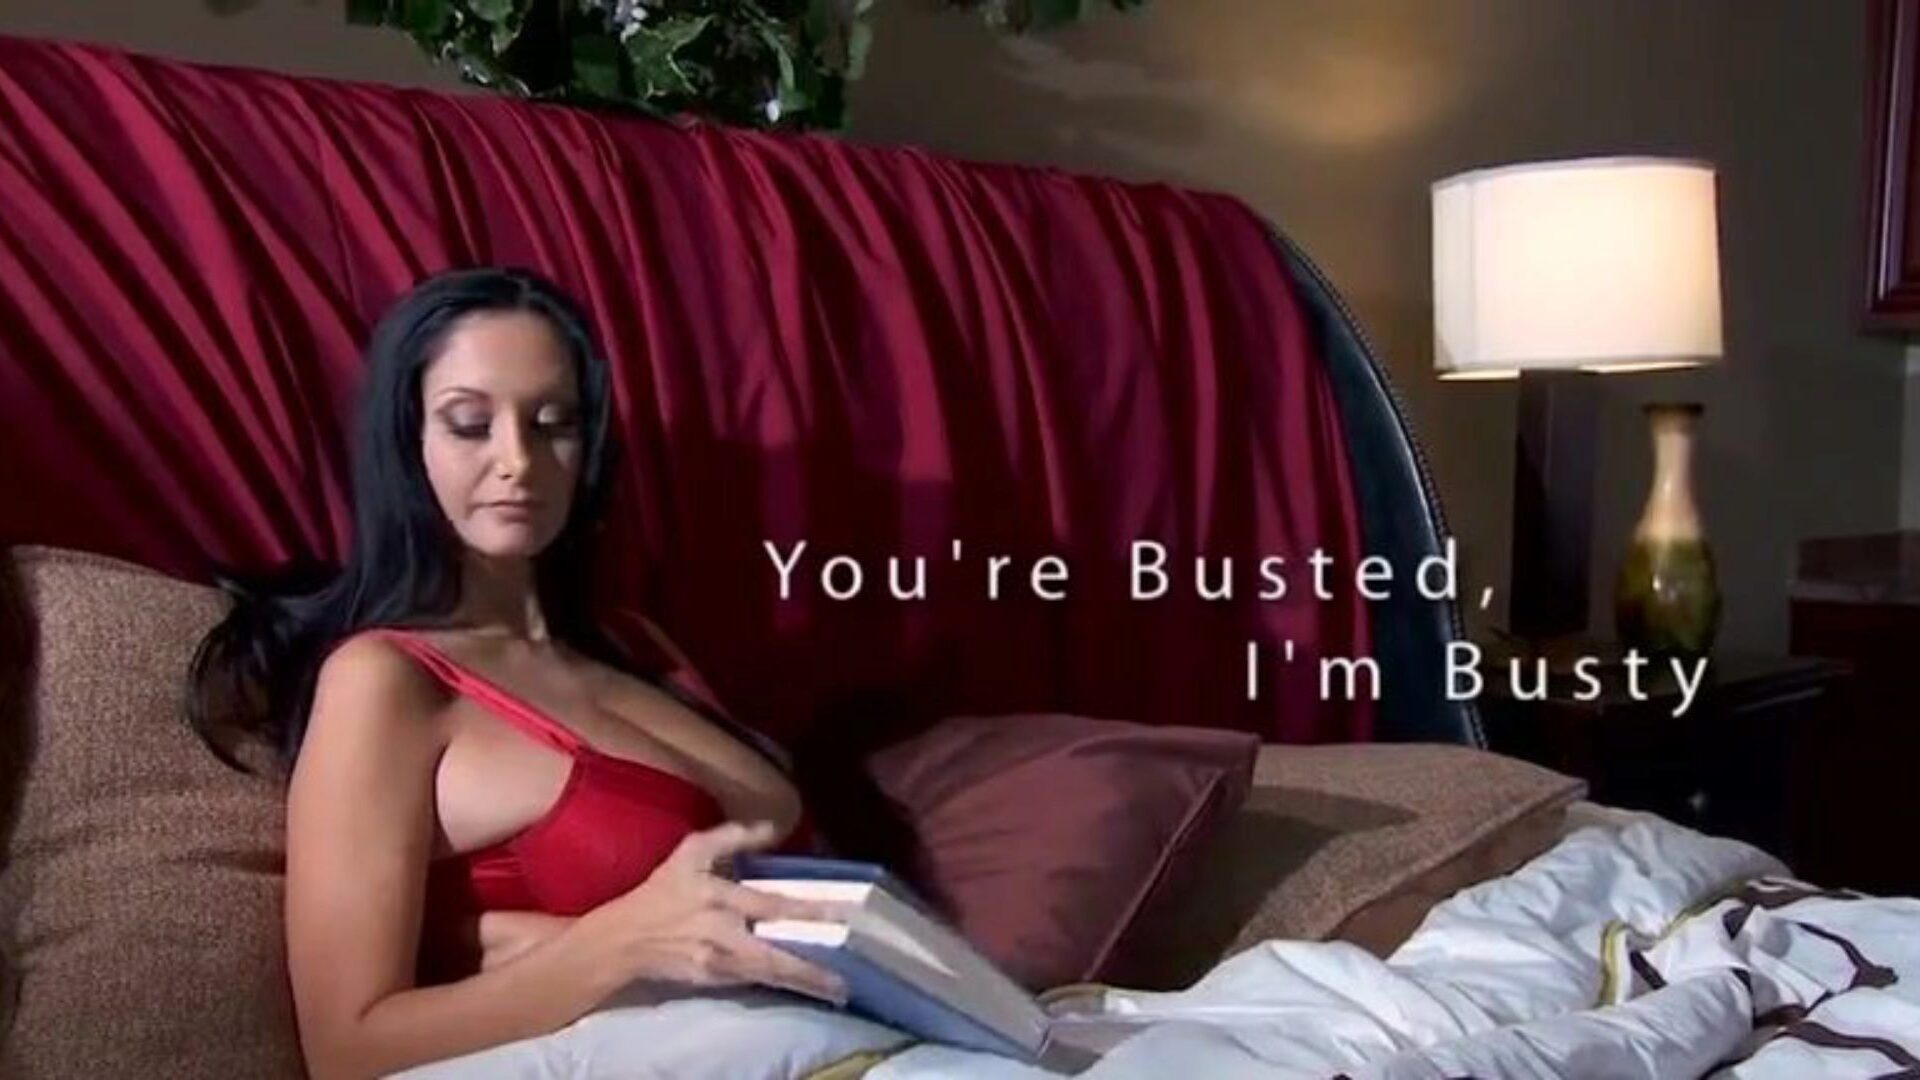 Real Wife Stories -  Youre Busted, Im Breasty vignette starring Ava Addams and Johnny Sins